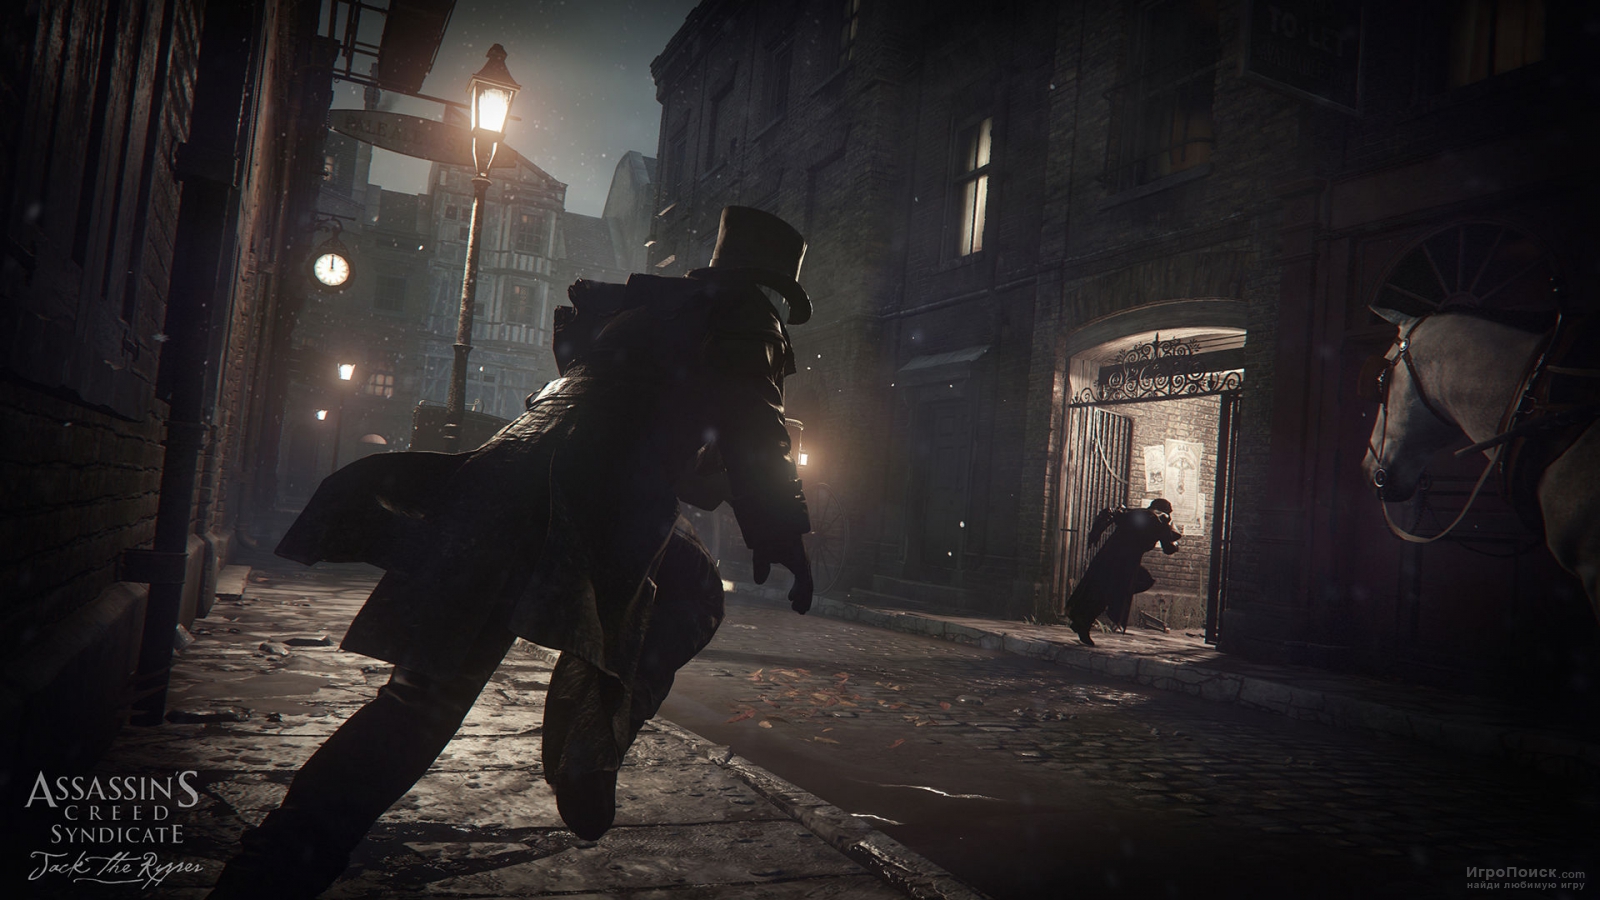    Assassin's Creed: Syndicate - Jack the Ripper